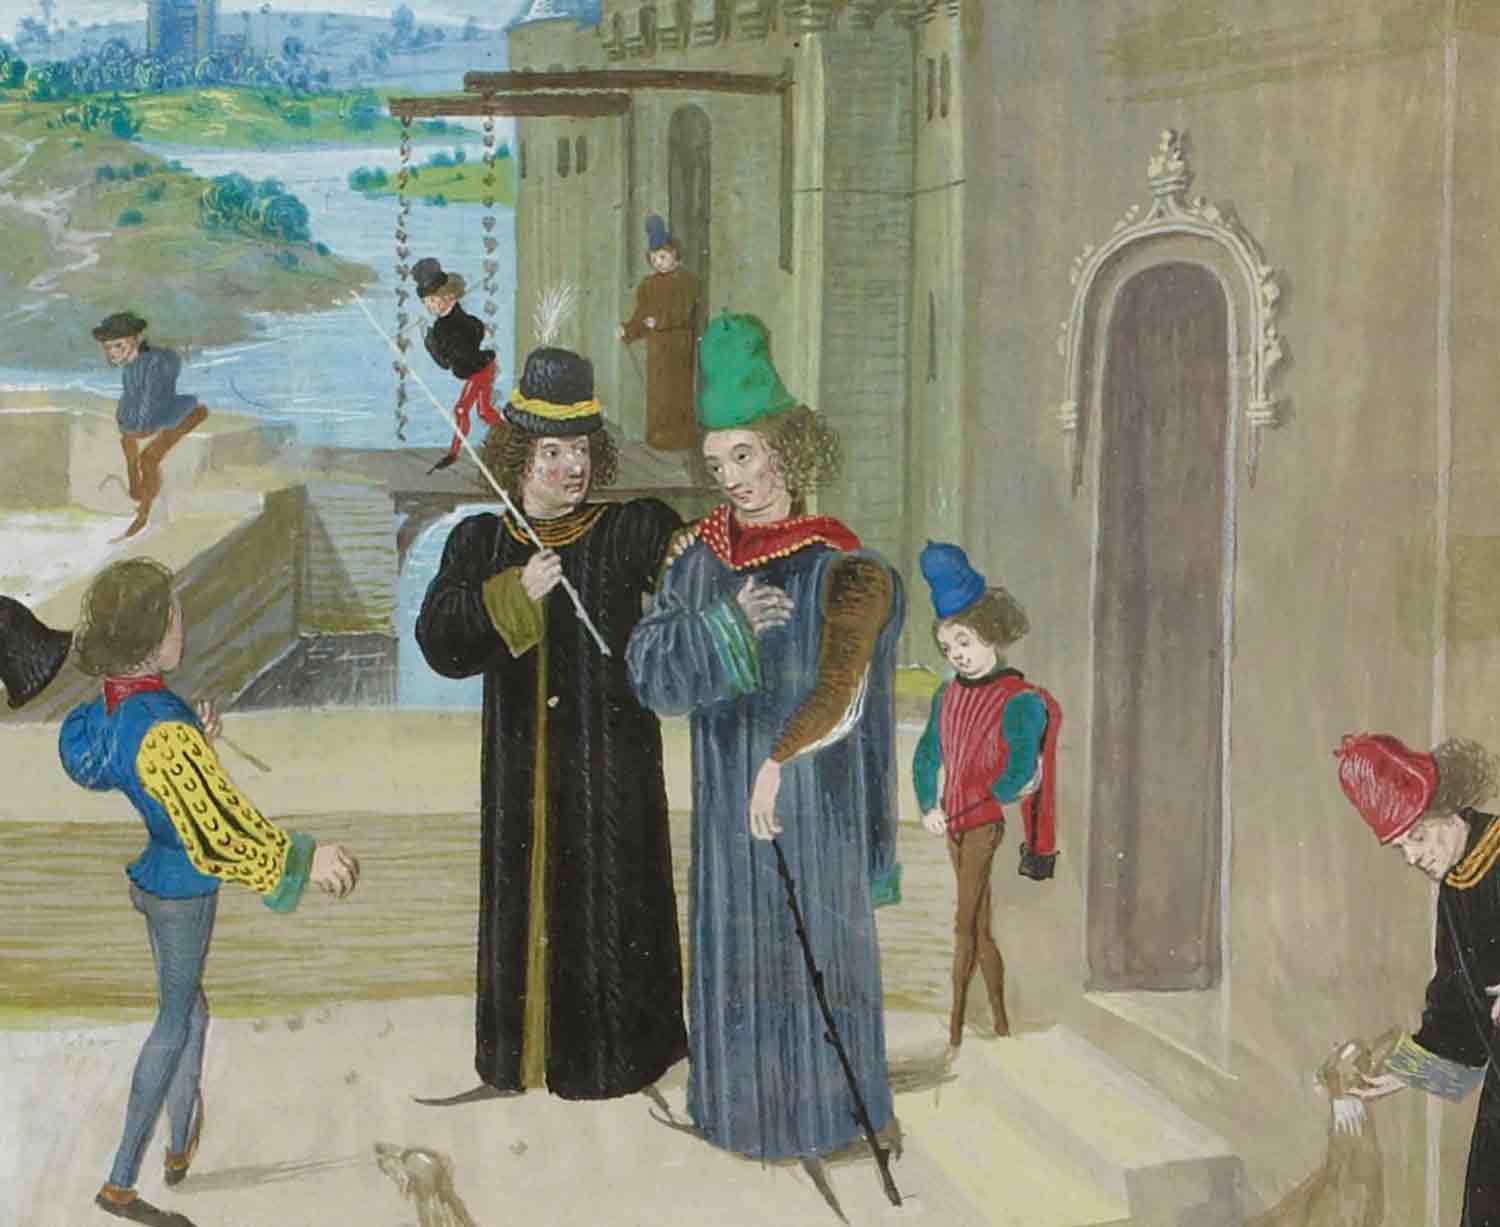 A medieval painting shows a man being arrested outside a castle door with three other people nearby.